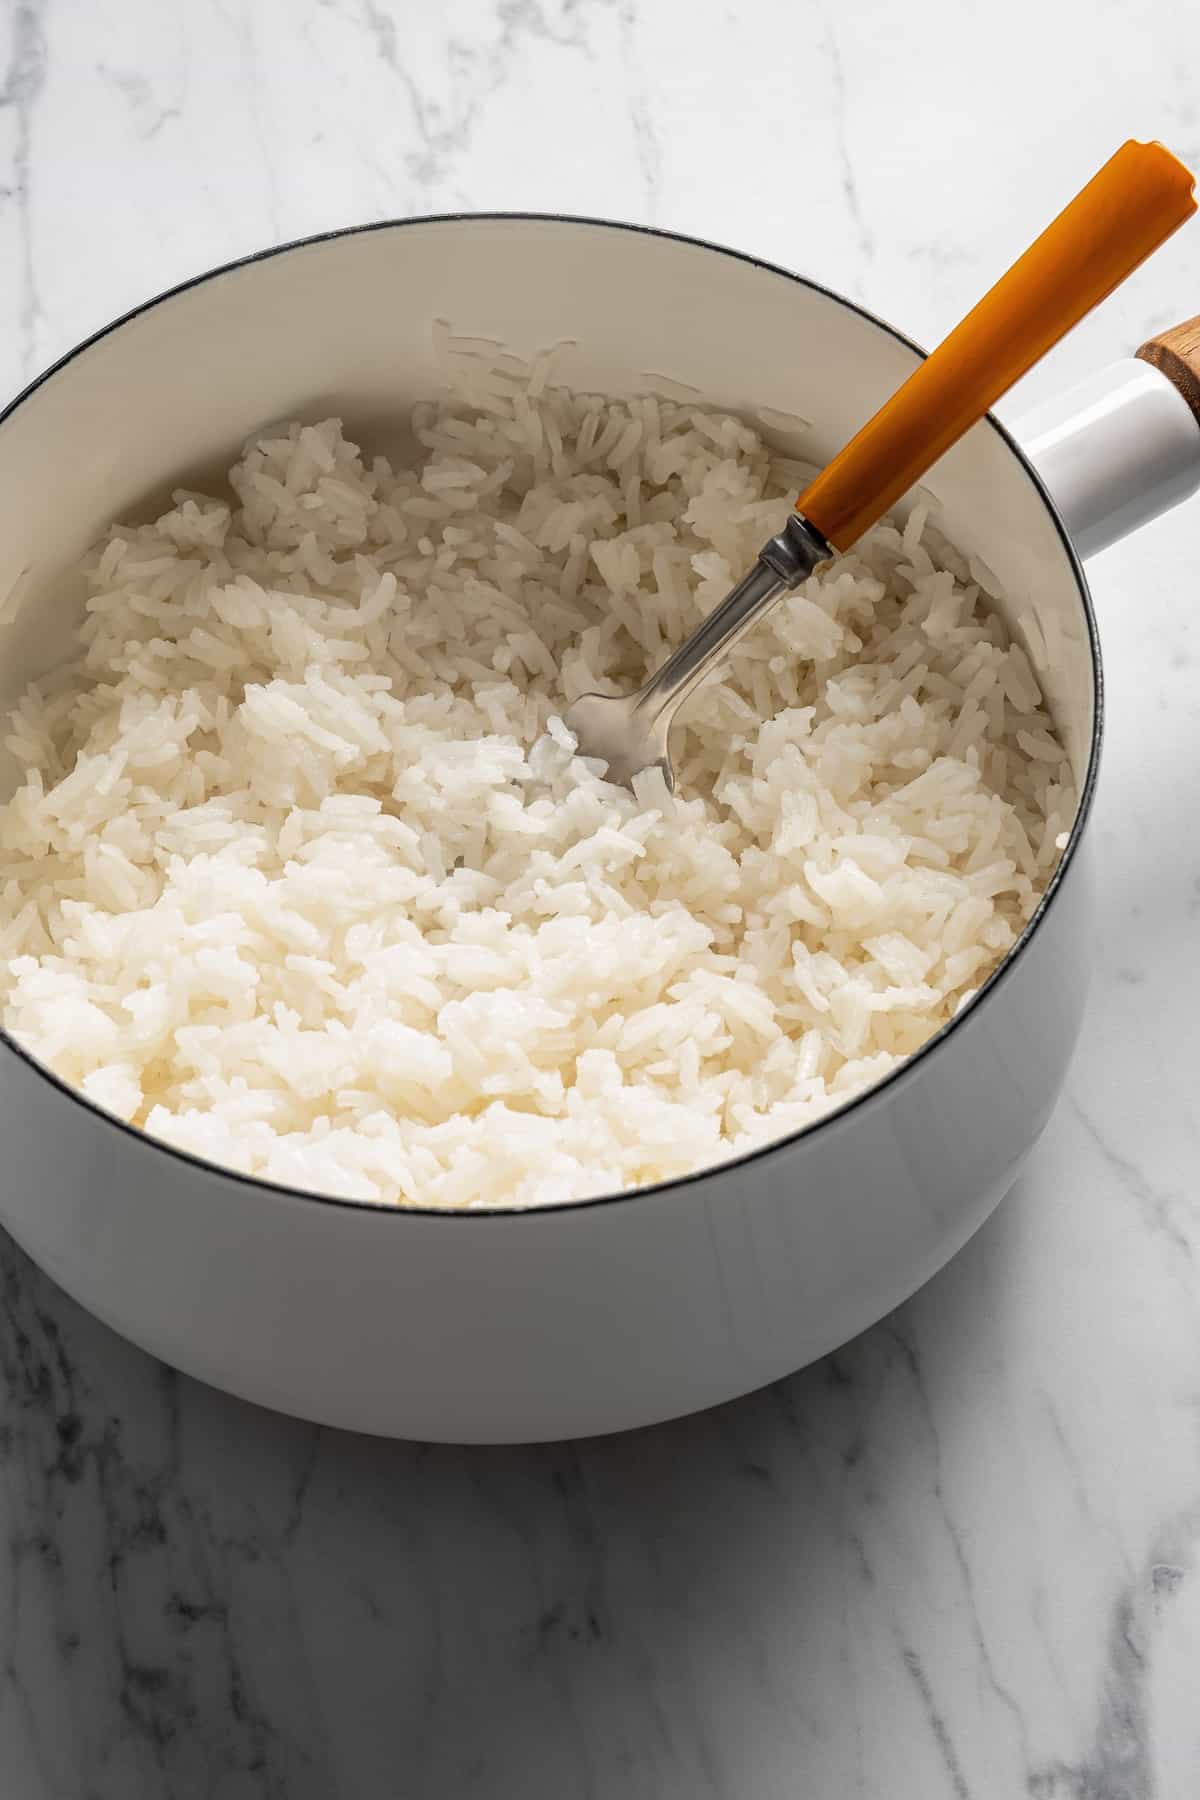 Fluffing cooked wite rice with a fork.